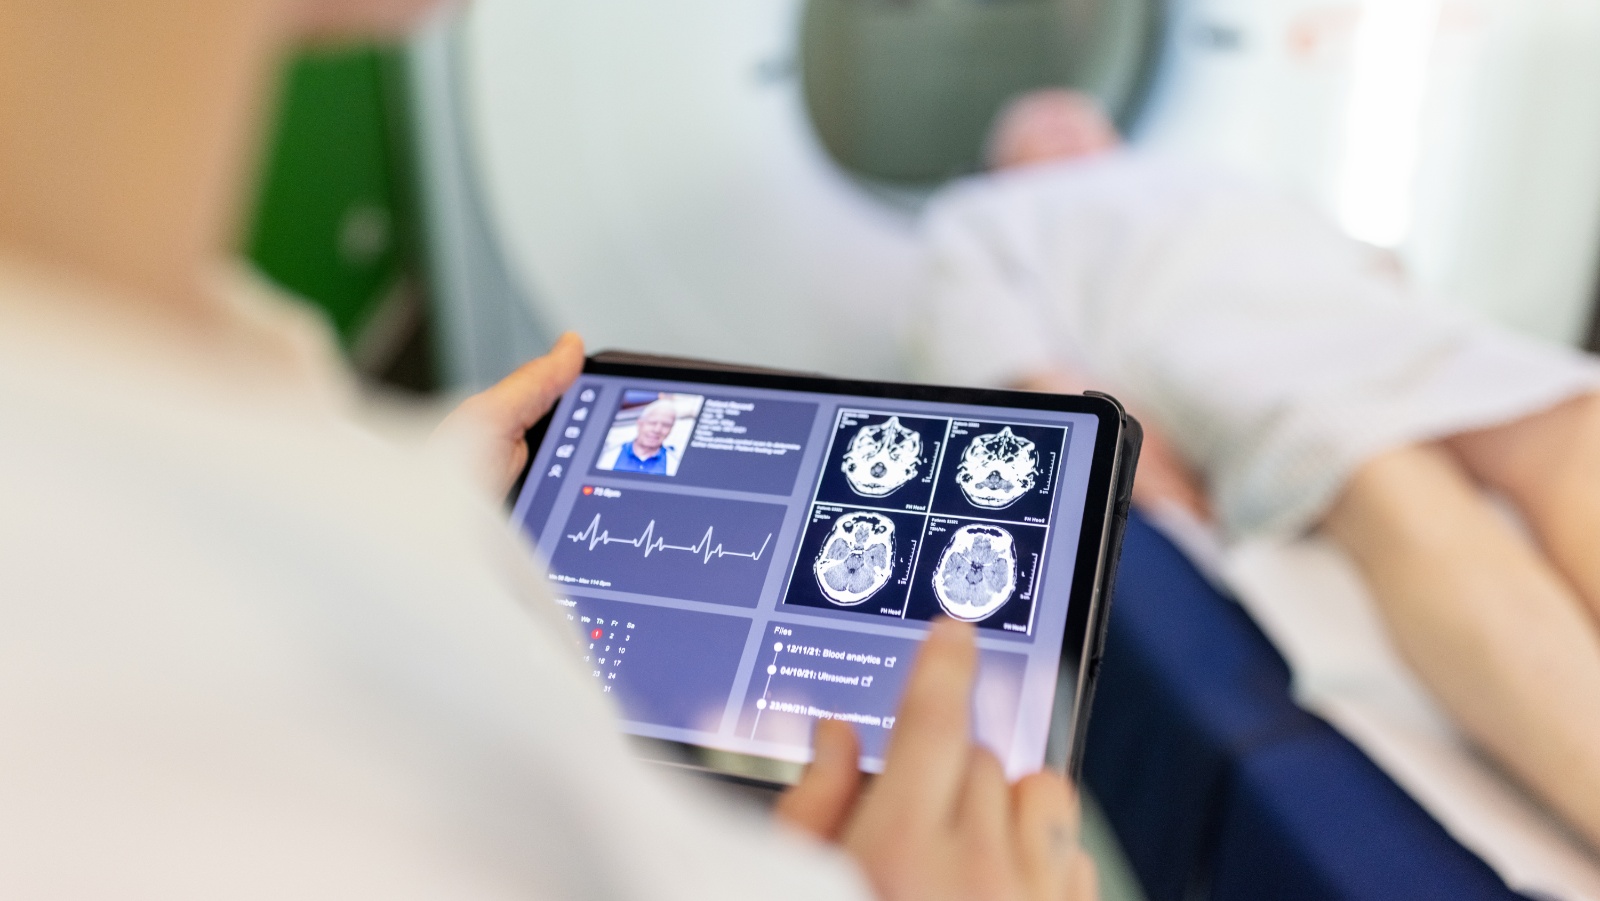 U of A researchers will use artificial intelligence to read brain images of suspected stroke patients, creating a blood flow map and highlighting blocked arteries to allow quicker diagnosis and treatment. (Photo: Getty Images)